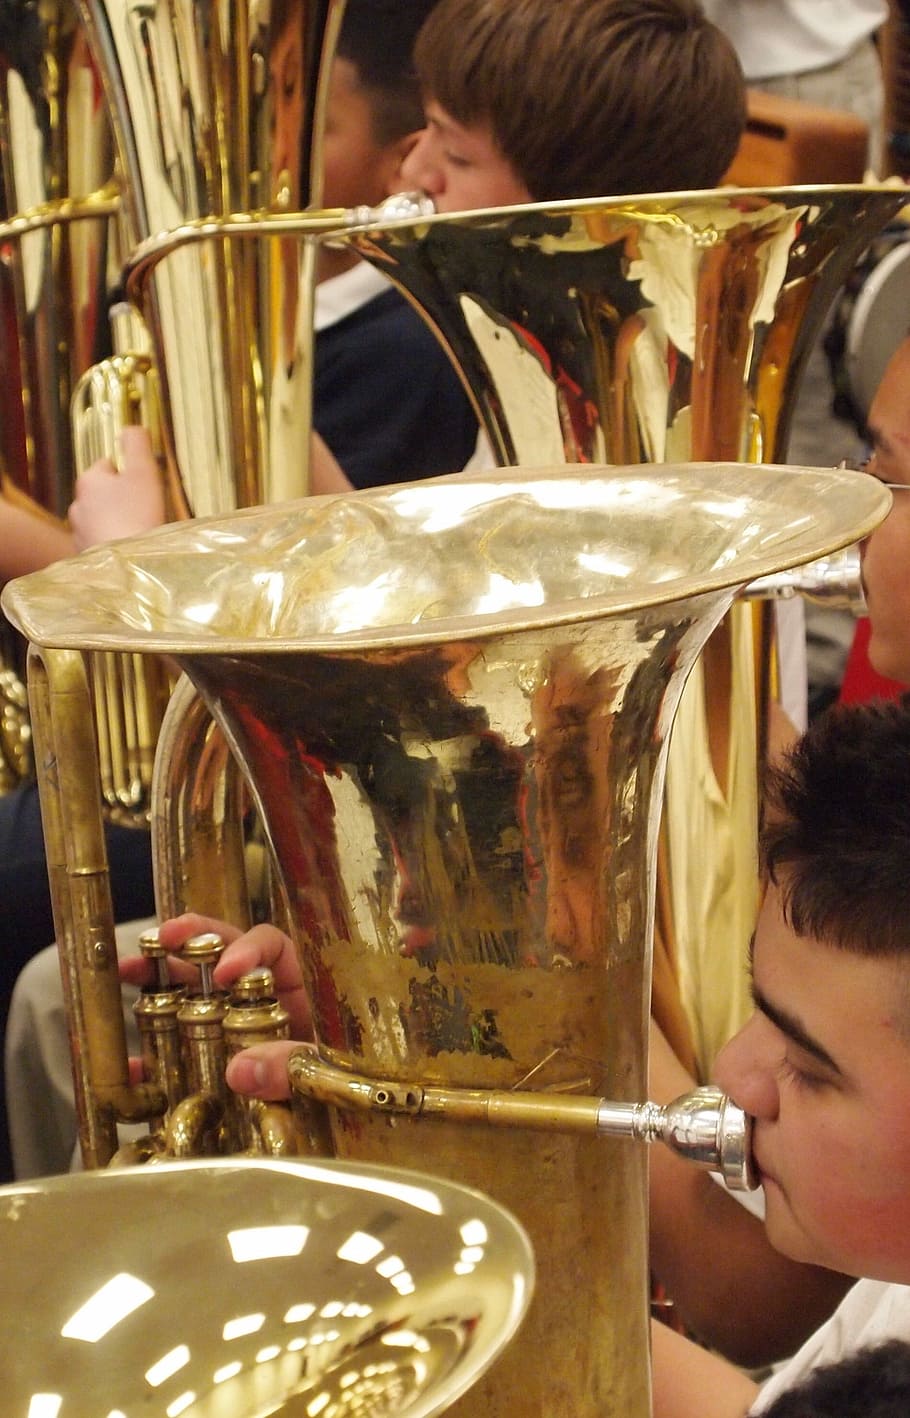 Band, Musical Instruments, Education, tuba, music, jazz, indoors, adult, reflection, adults only